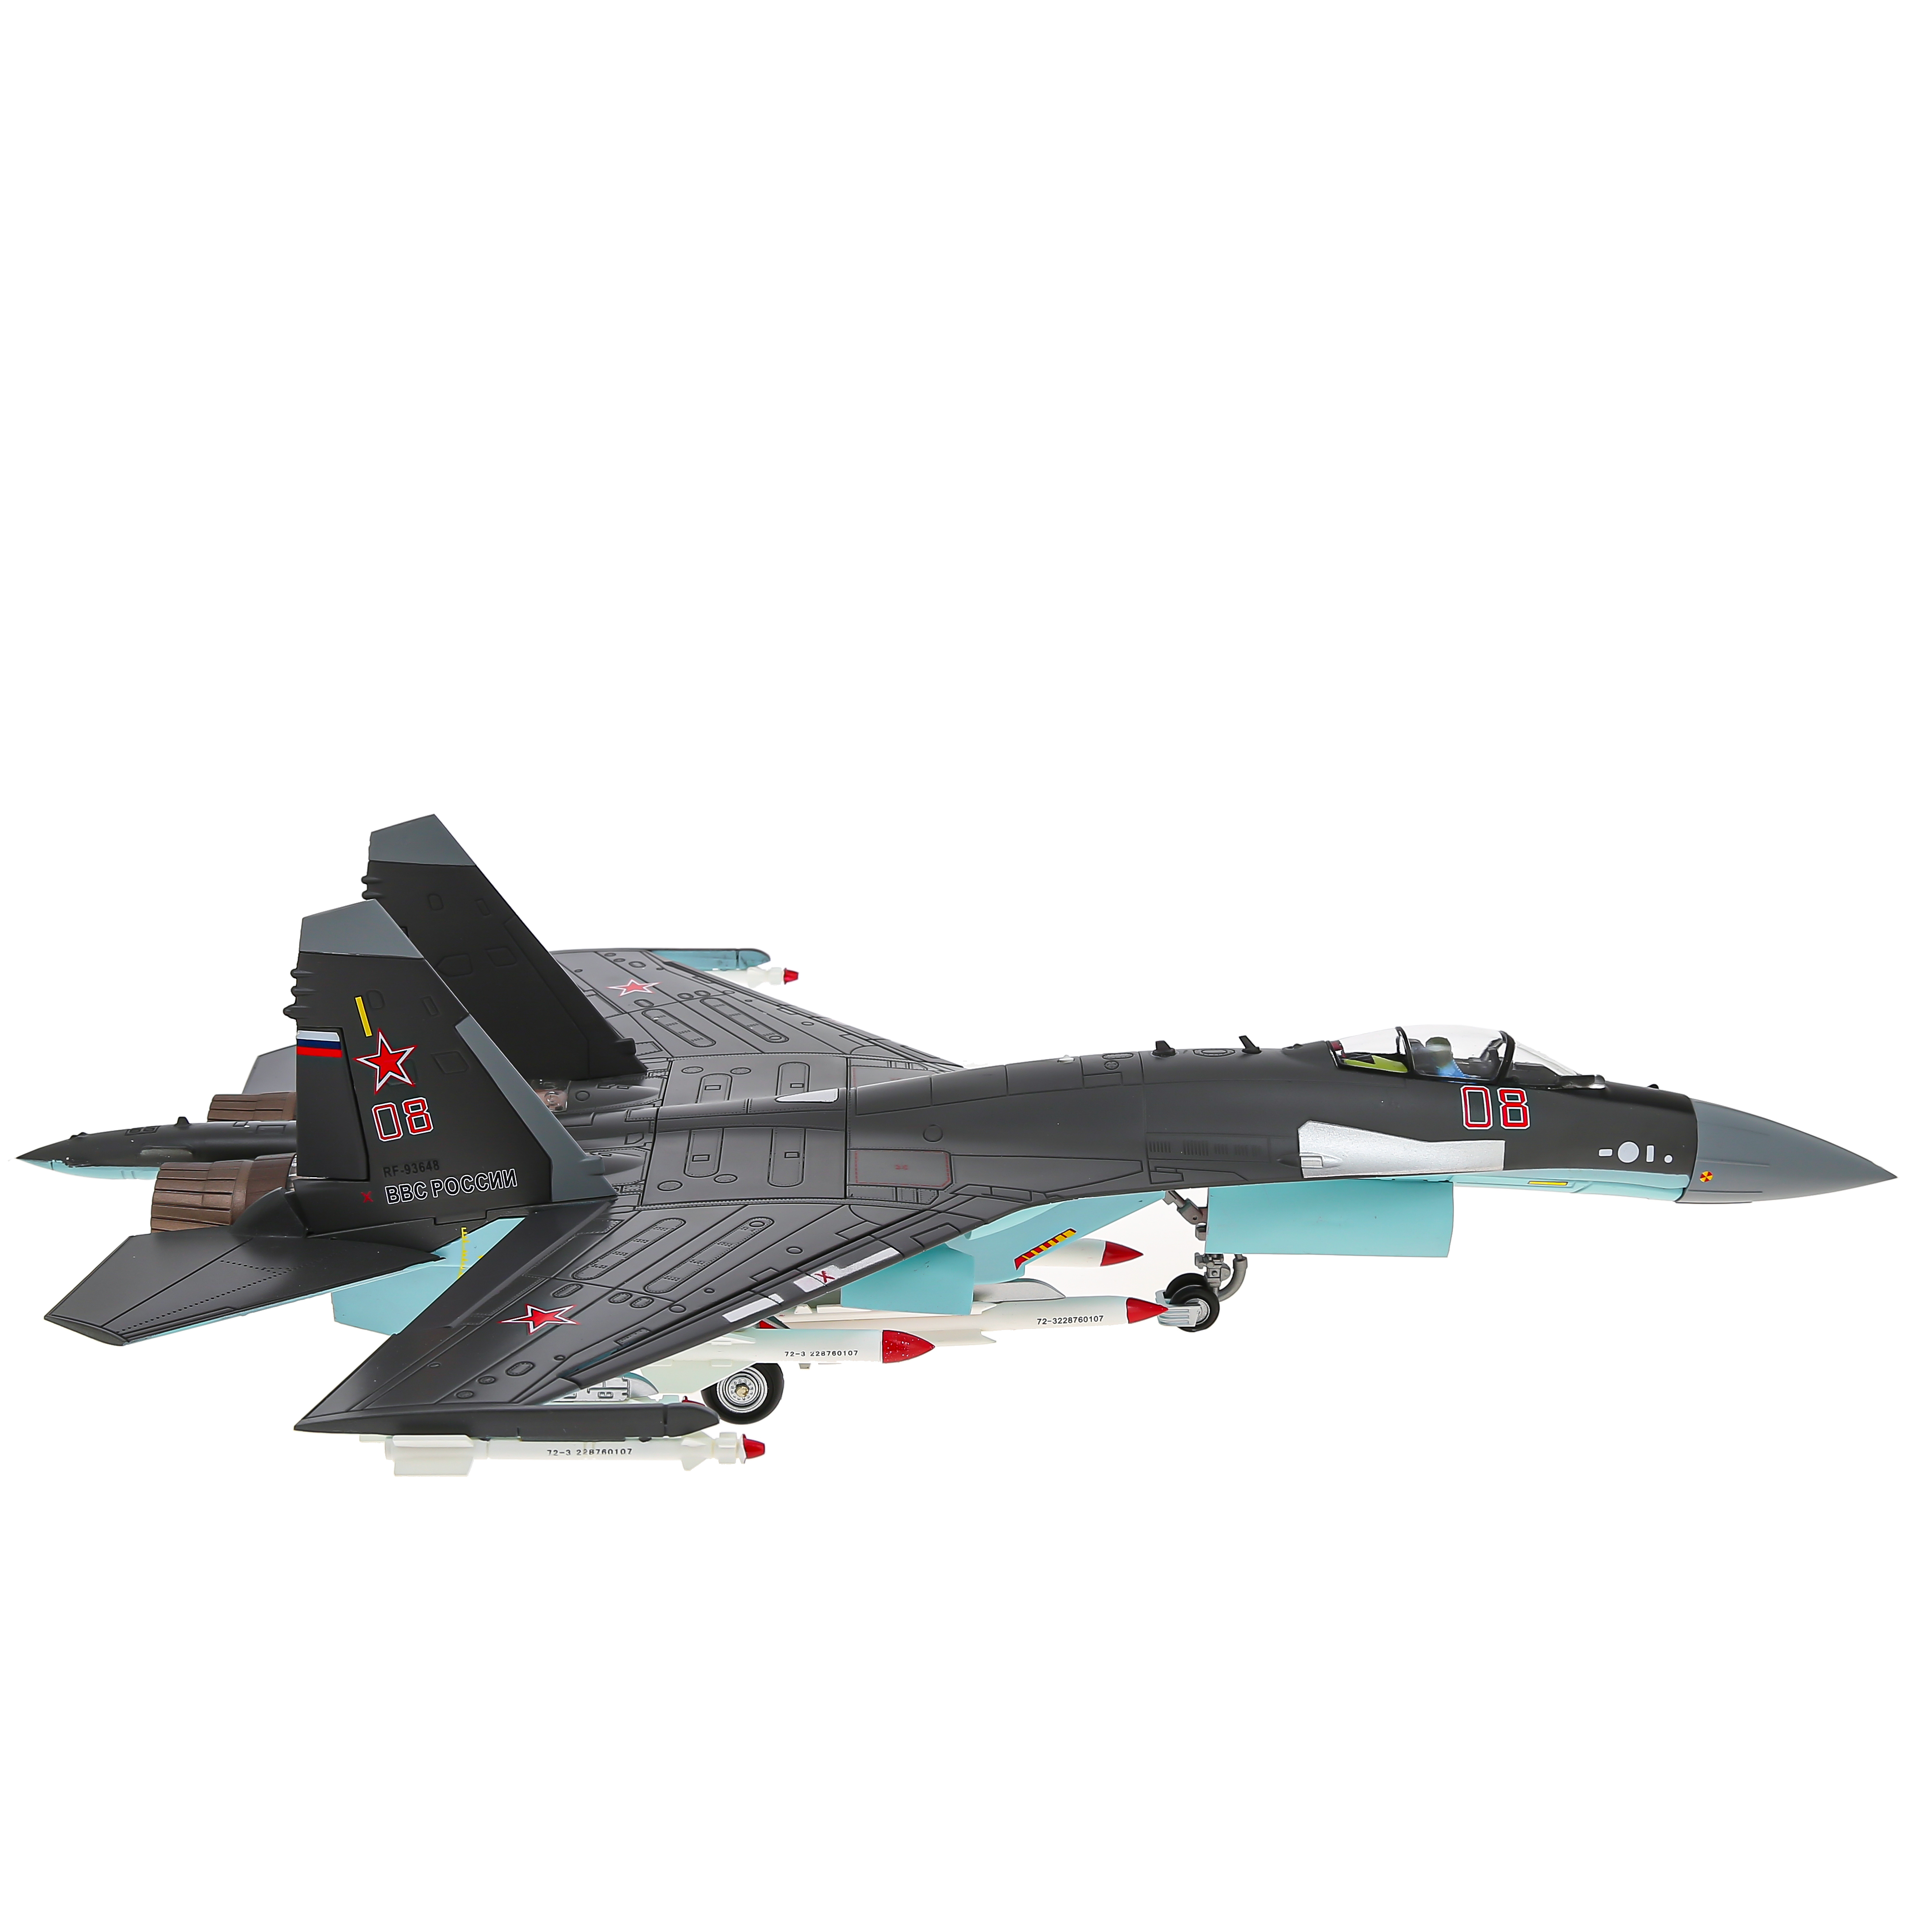       -35 ,  1:48.  47 . Large metal model of a Russian Su-35 fighter airplane, scale 1:48. Length 47 cm. # 4 hobbyplus.ru